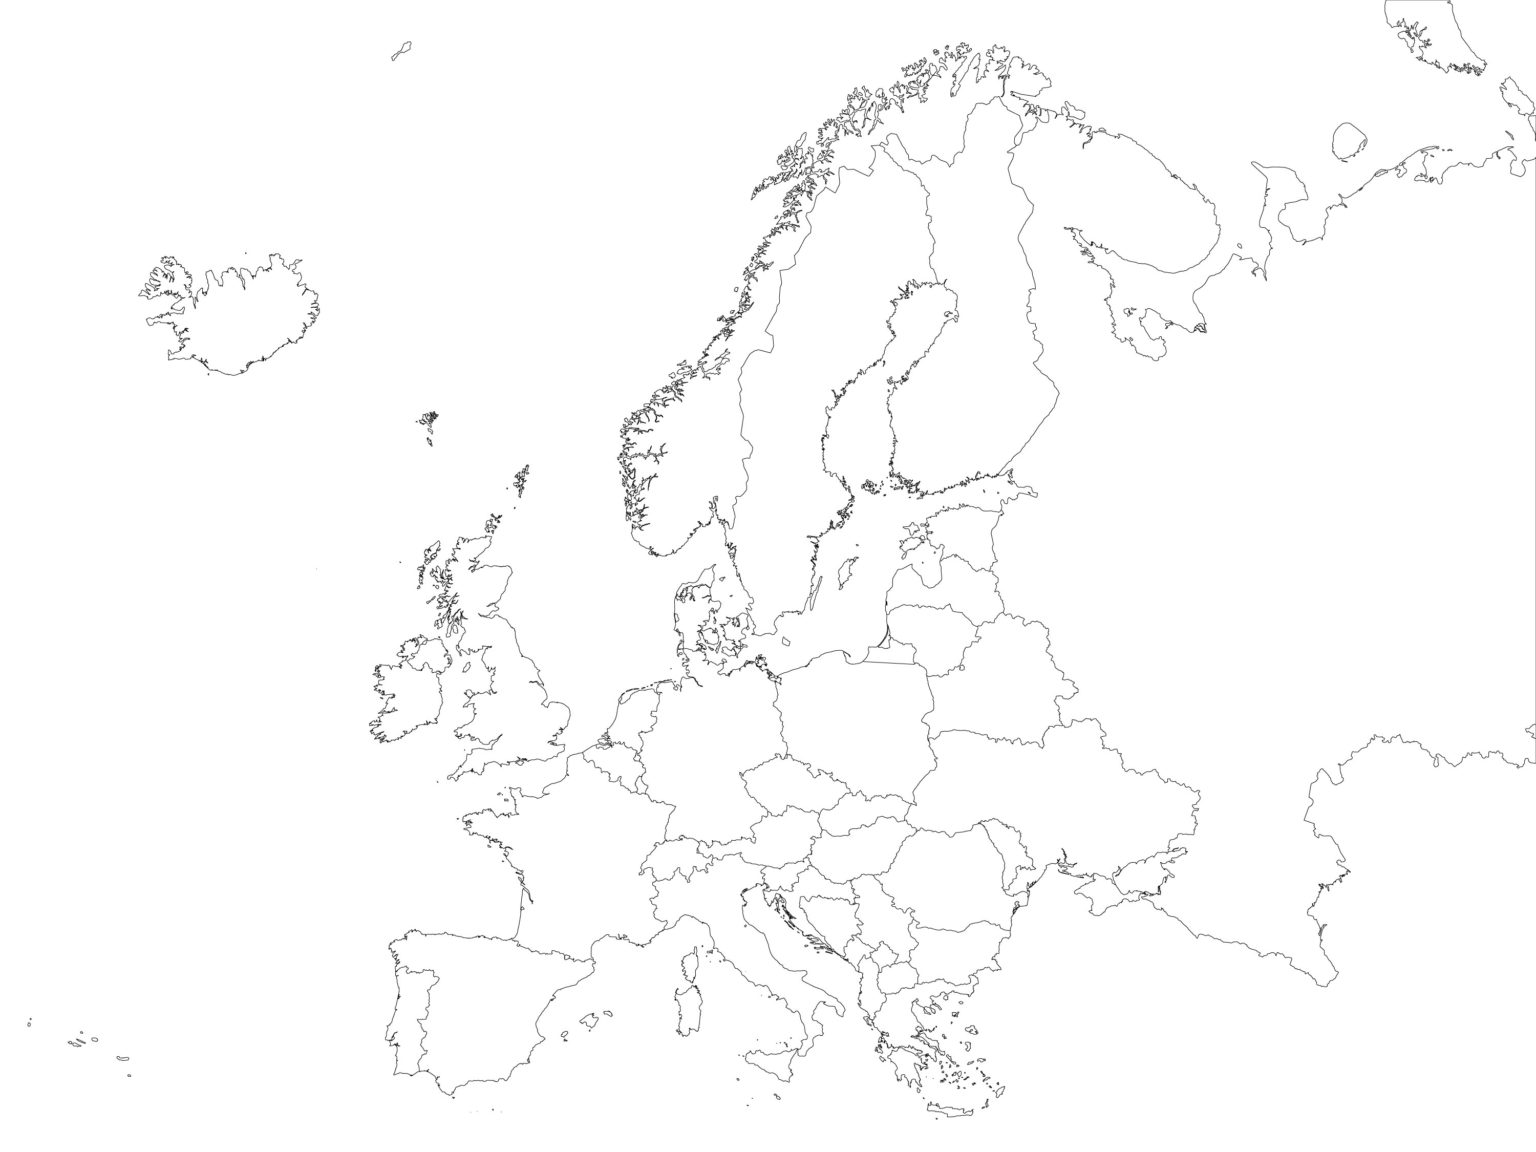 Country policy. Europe Map. Карта Европы черно белая. Карта Европы со странами. Карта Европы пустая с границами.